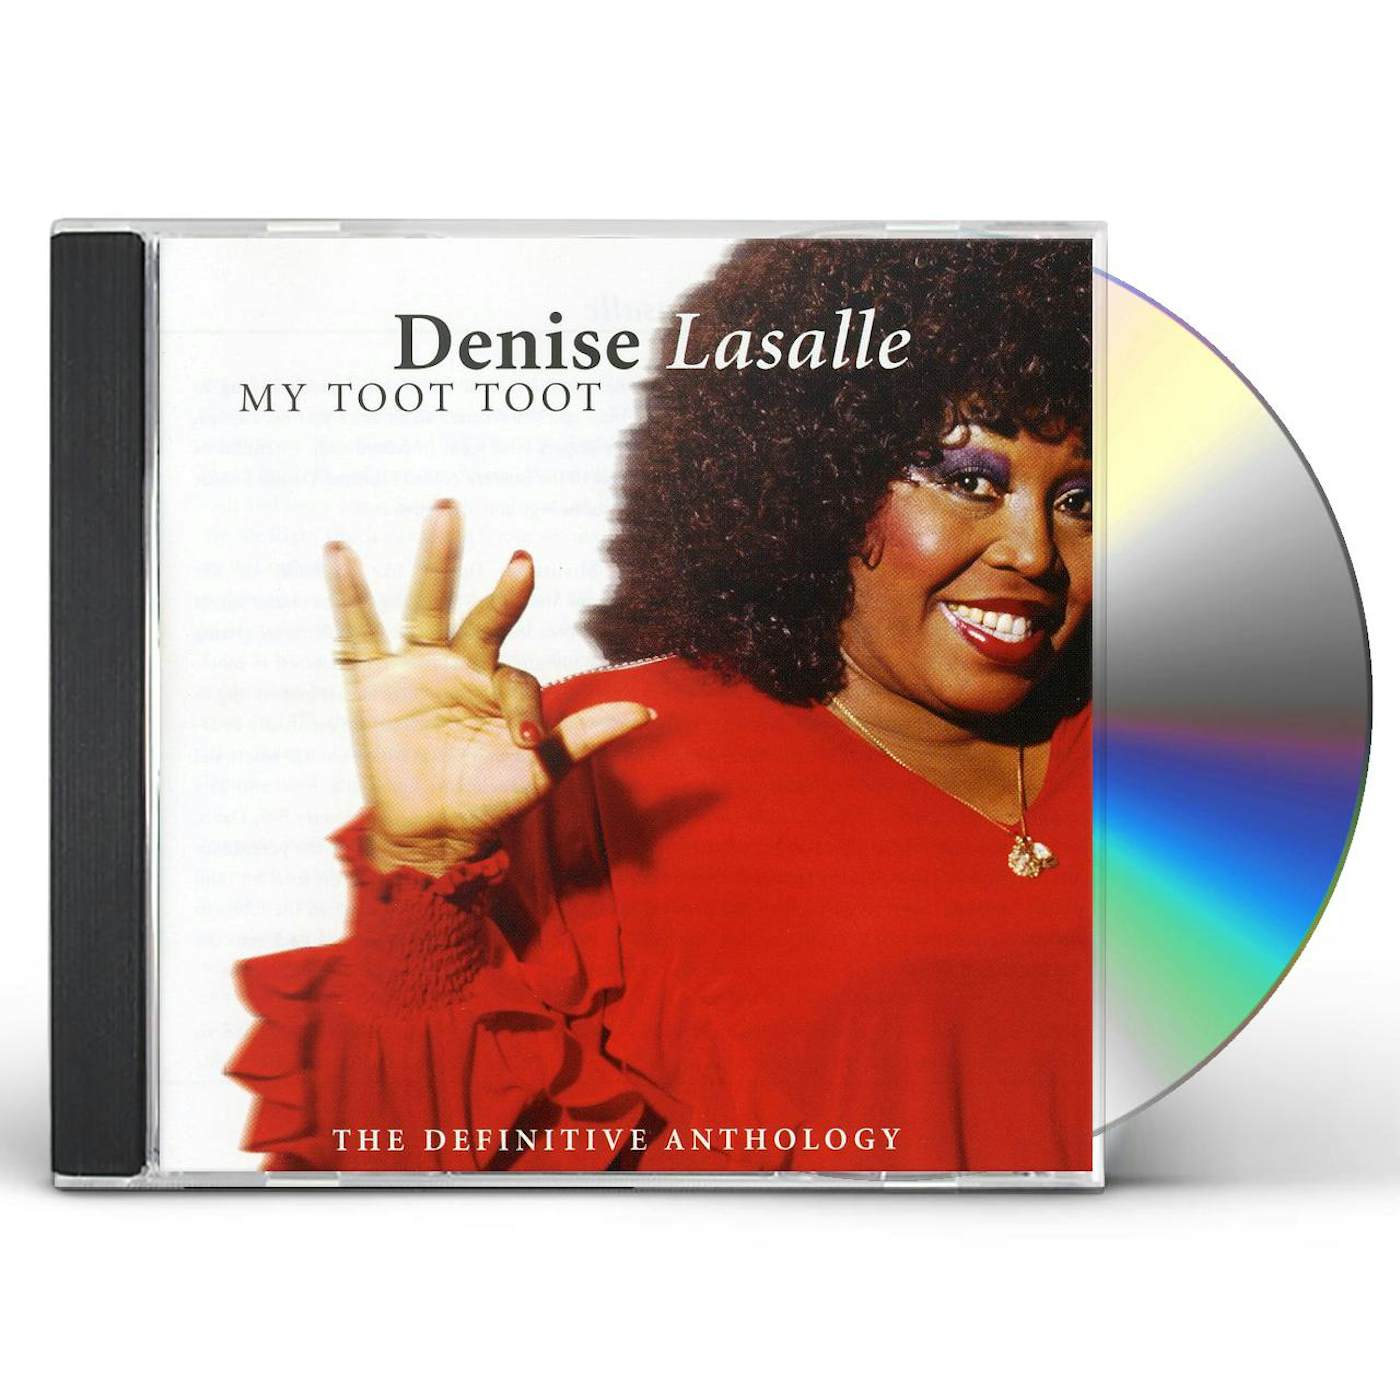 DENISE LaSALLE - Married, But Not To Each Other 